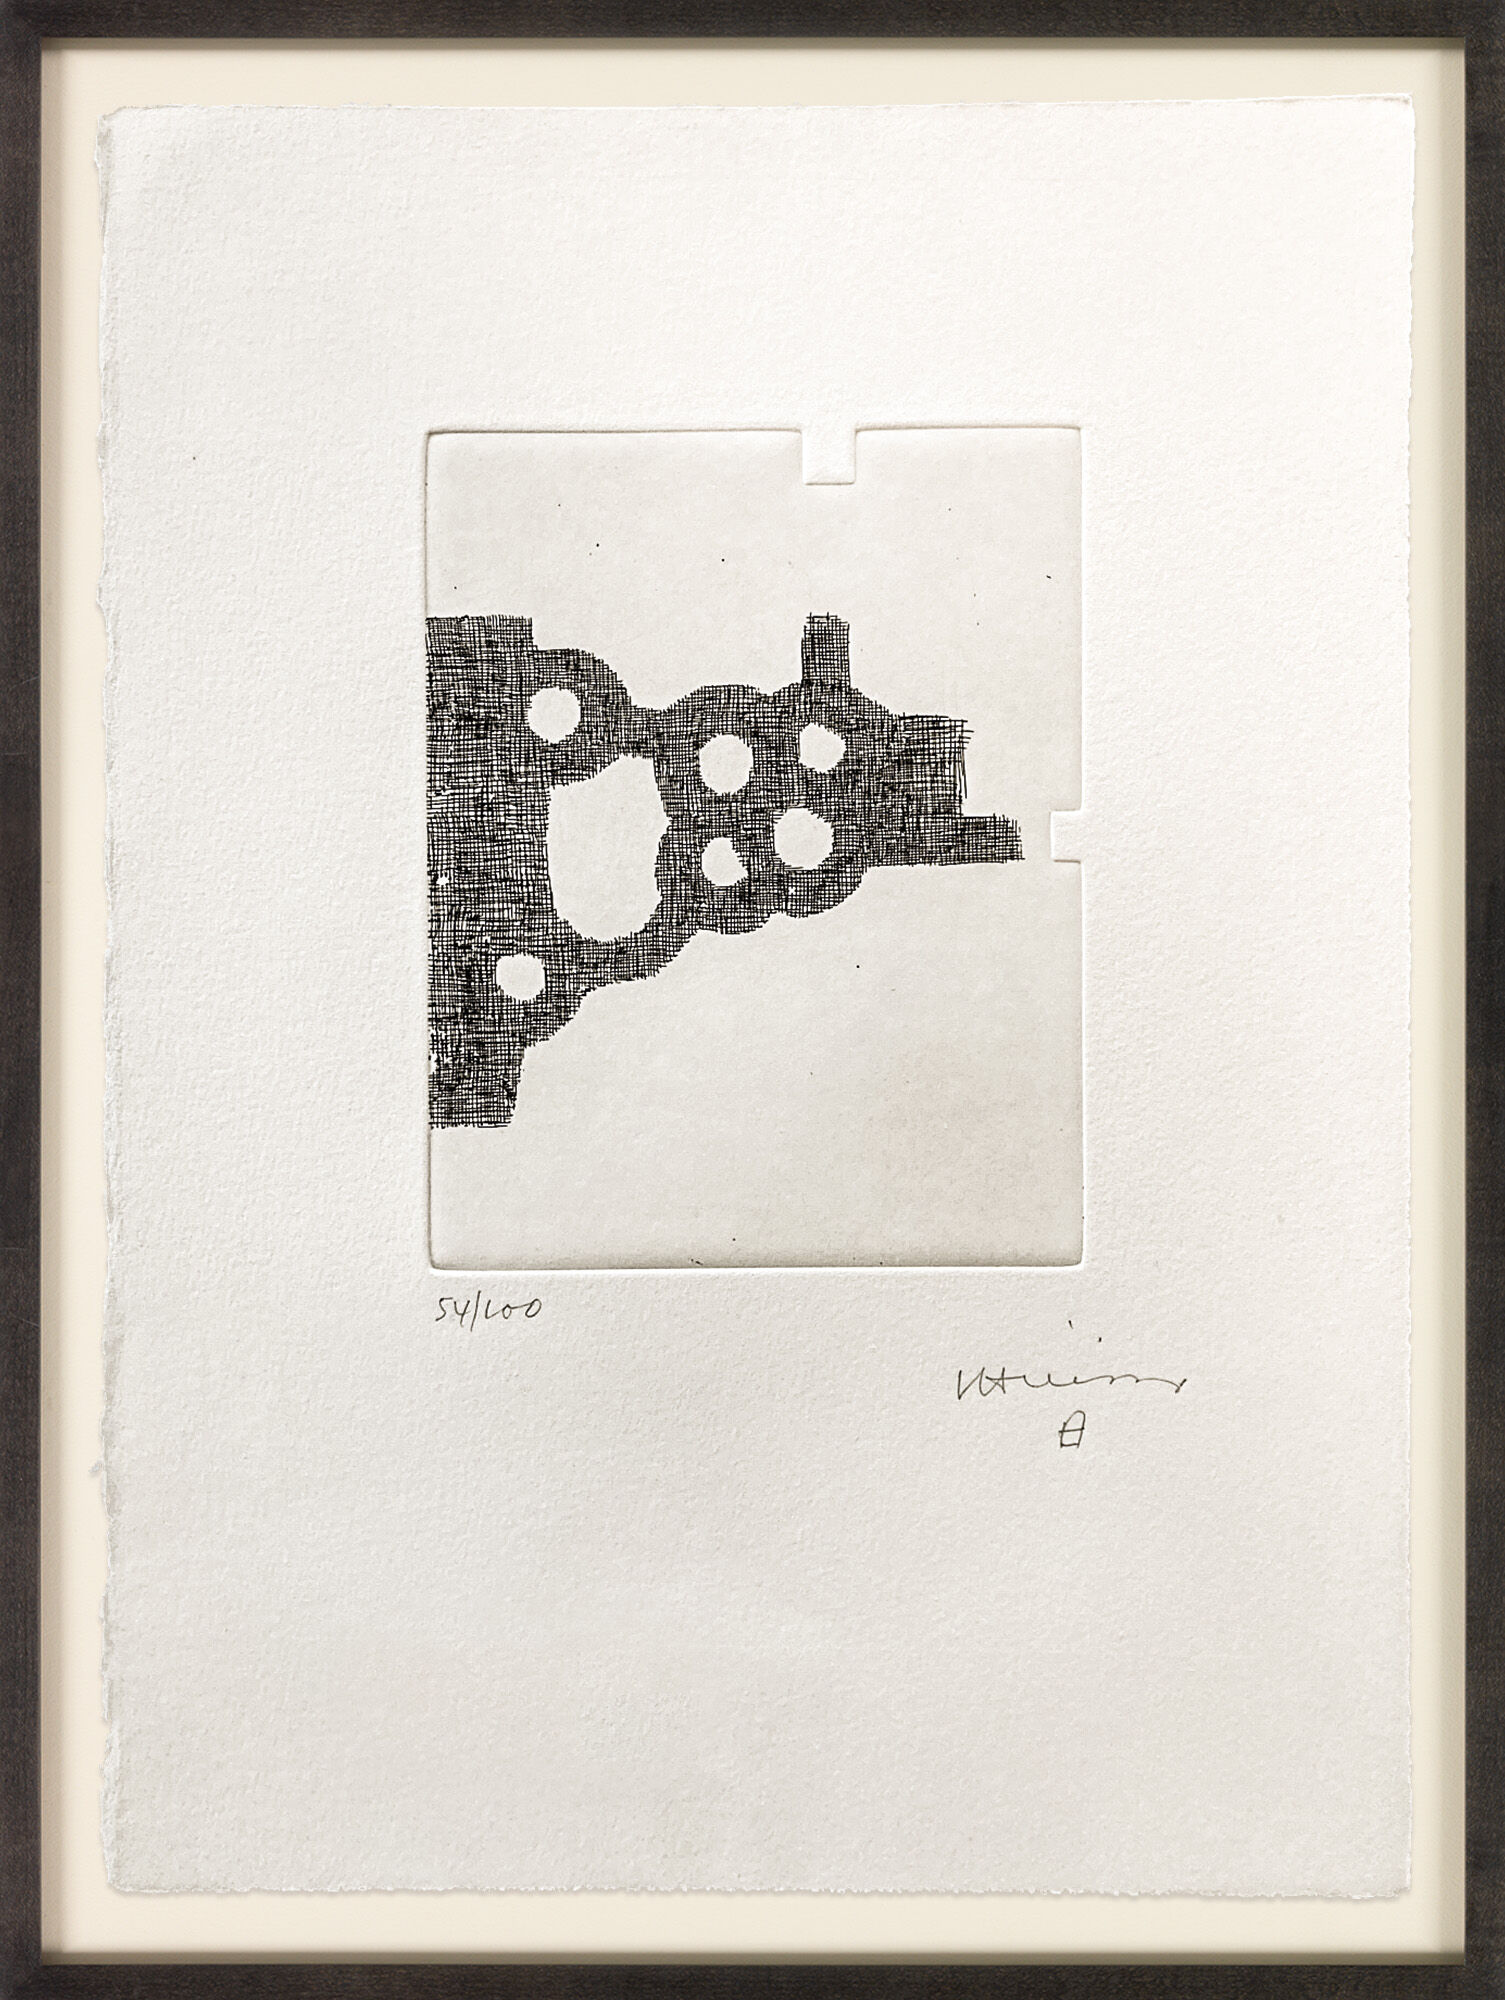 Picture "Literature of Life - french version" (1997) by Eduardo Chillida